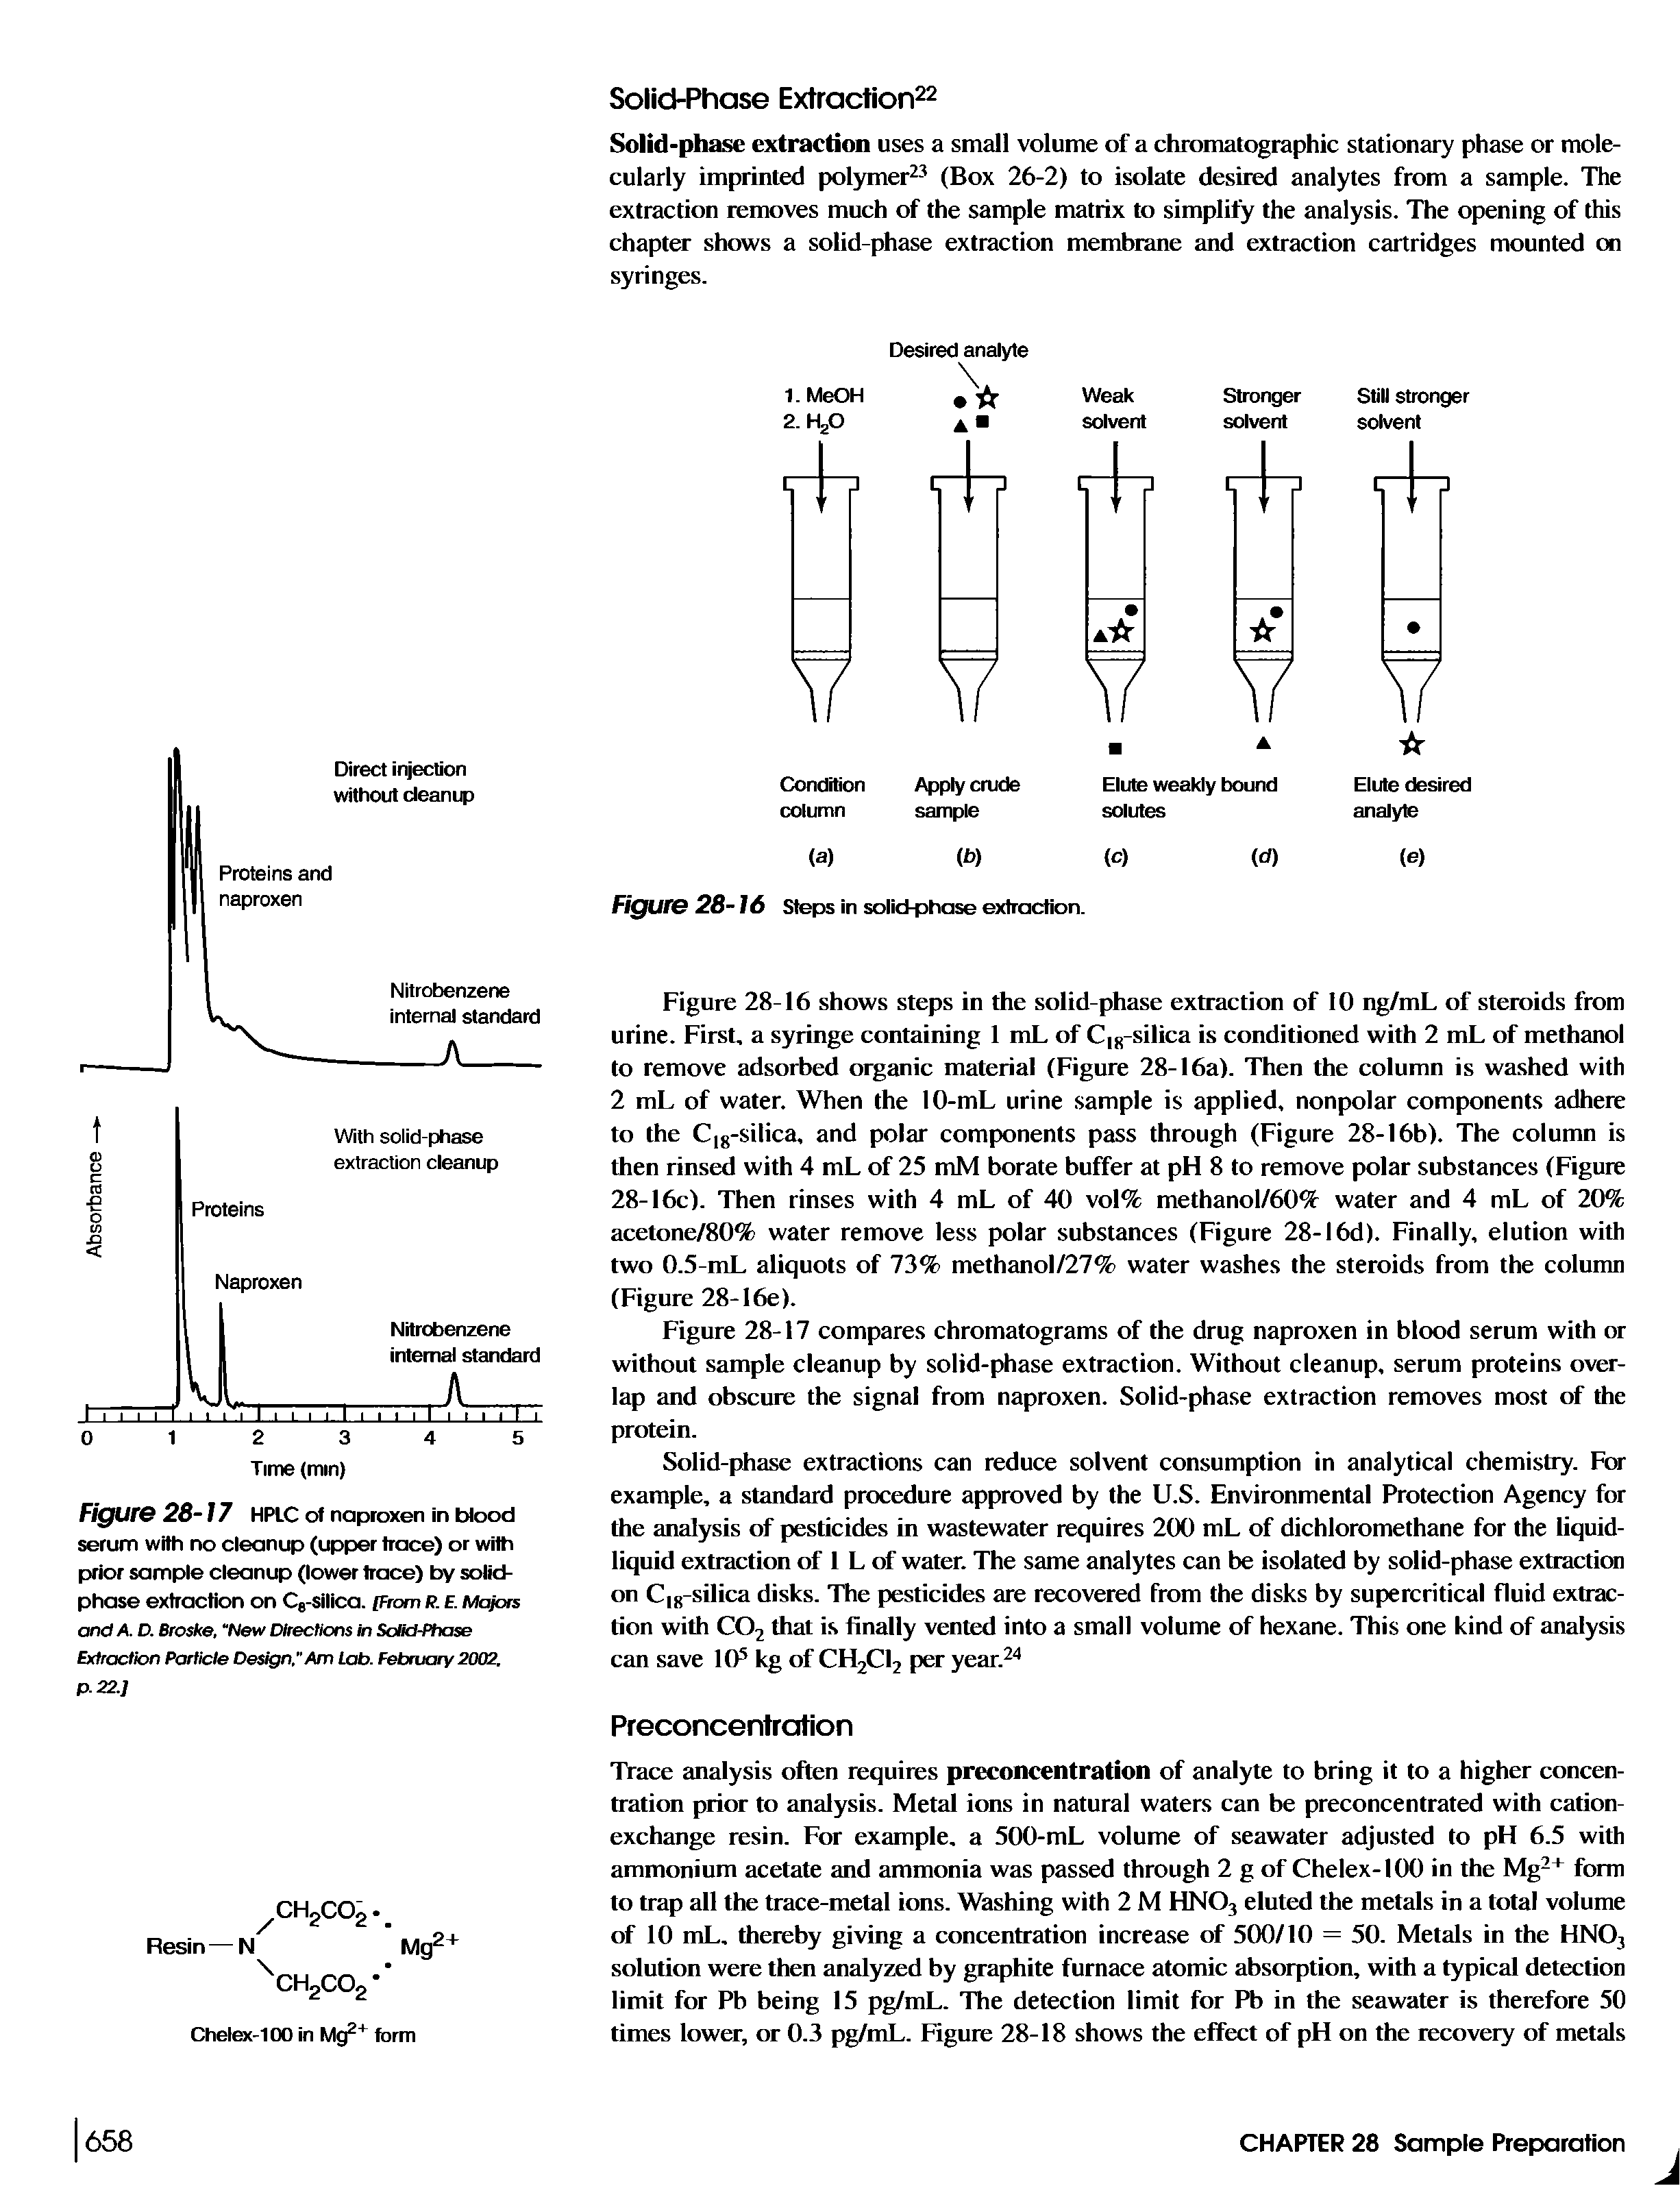 Figure 28-16 shows steps in the solid-phase extraction of 10 ng/mL of steroids from urine. First, a syringe containing 1 mL of C 8-silica is conditioned with 2 mL of methanol to remove adsorbed organic material (Figure 28-16a). Then the column is washed with 2 mL of water. When the 10-mL urine sample is applied, nonpolar components adhere to the C18-silica, and polar components pass through (Figure 28-16b). The column is then rinsed with 4 mL of 25 mM borate buffer at pH 8 to remove polar substances (Figure 28-16c). Then rinses with 4 mL of 40 vol% methanol/60% water and 4 mL of 20% acetone/80% water remove less polar substances (Figure 28-l6d). Finally, elution with two 0.5-mL aliquots of 73% methanol/27% water washes the steroids from the column (Figure 28-16e).